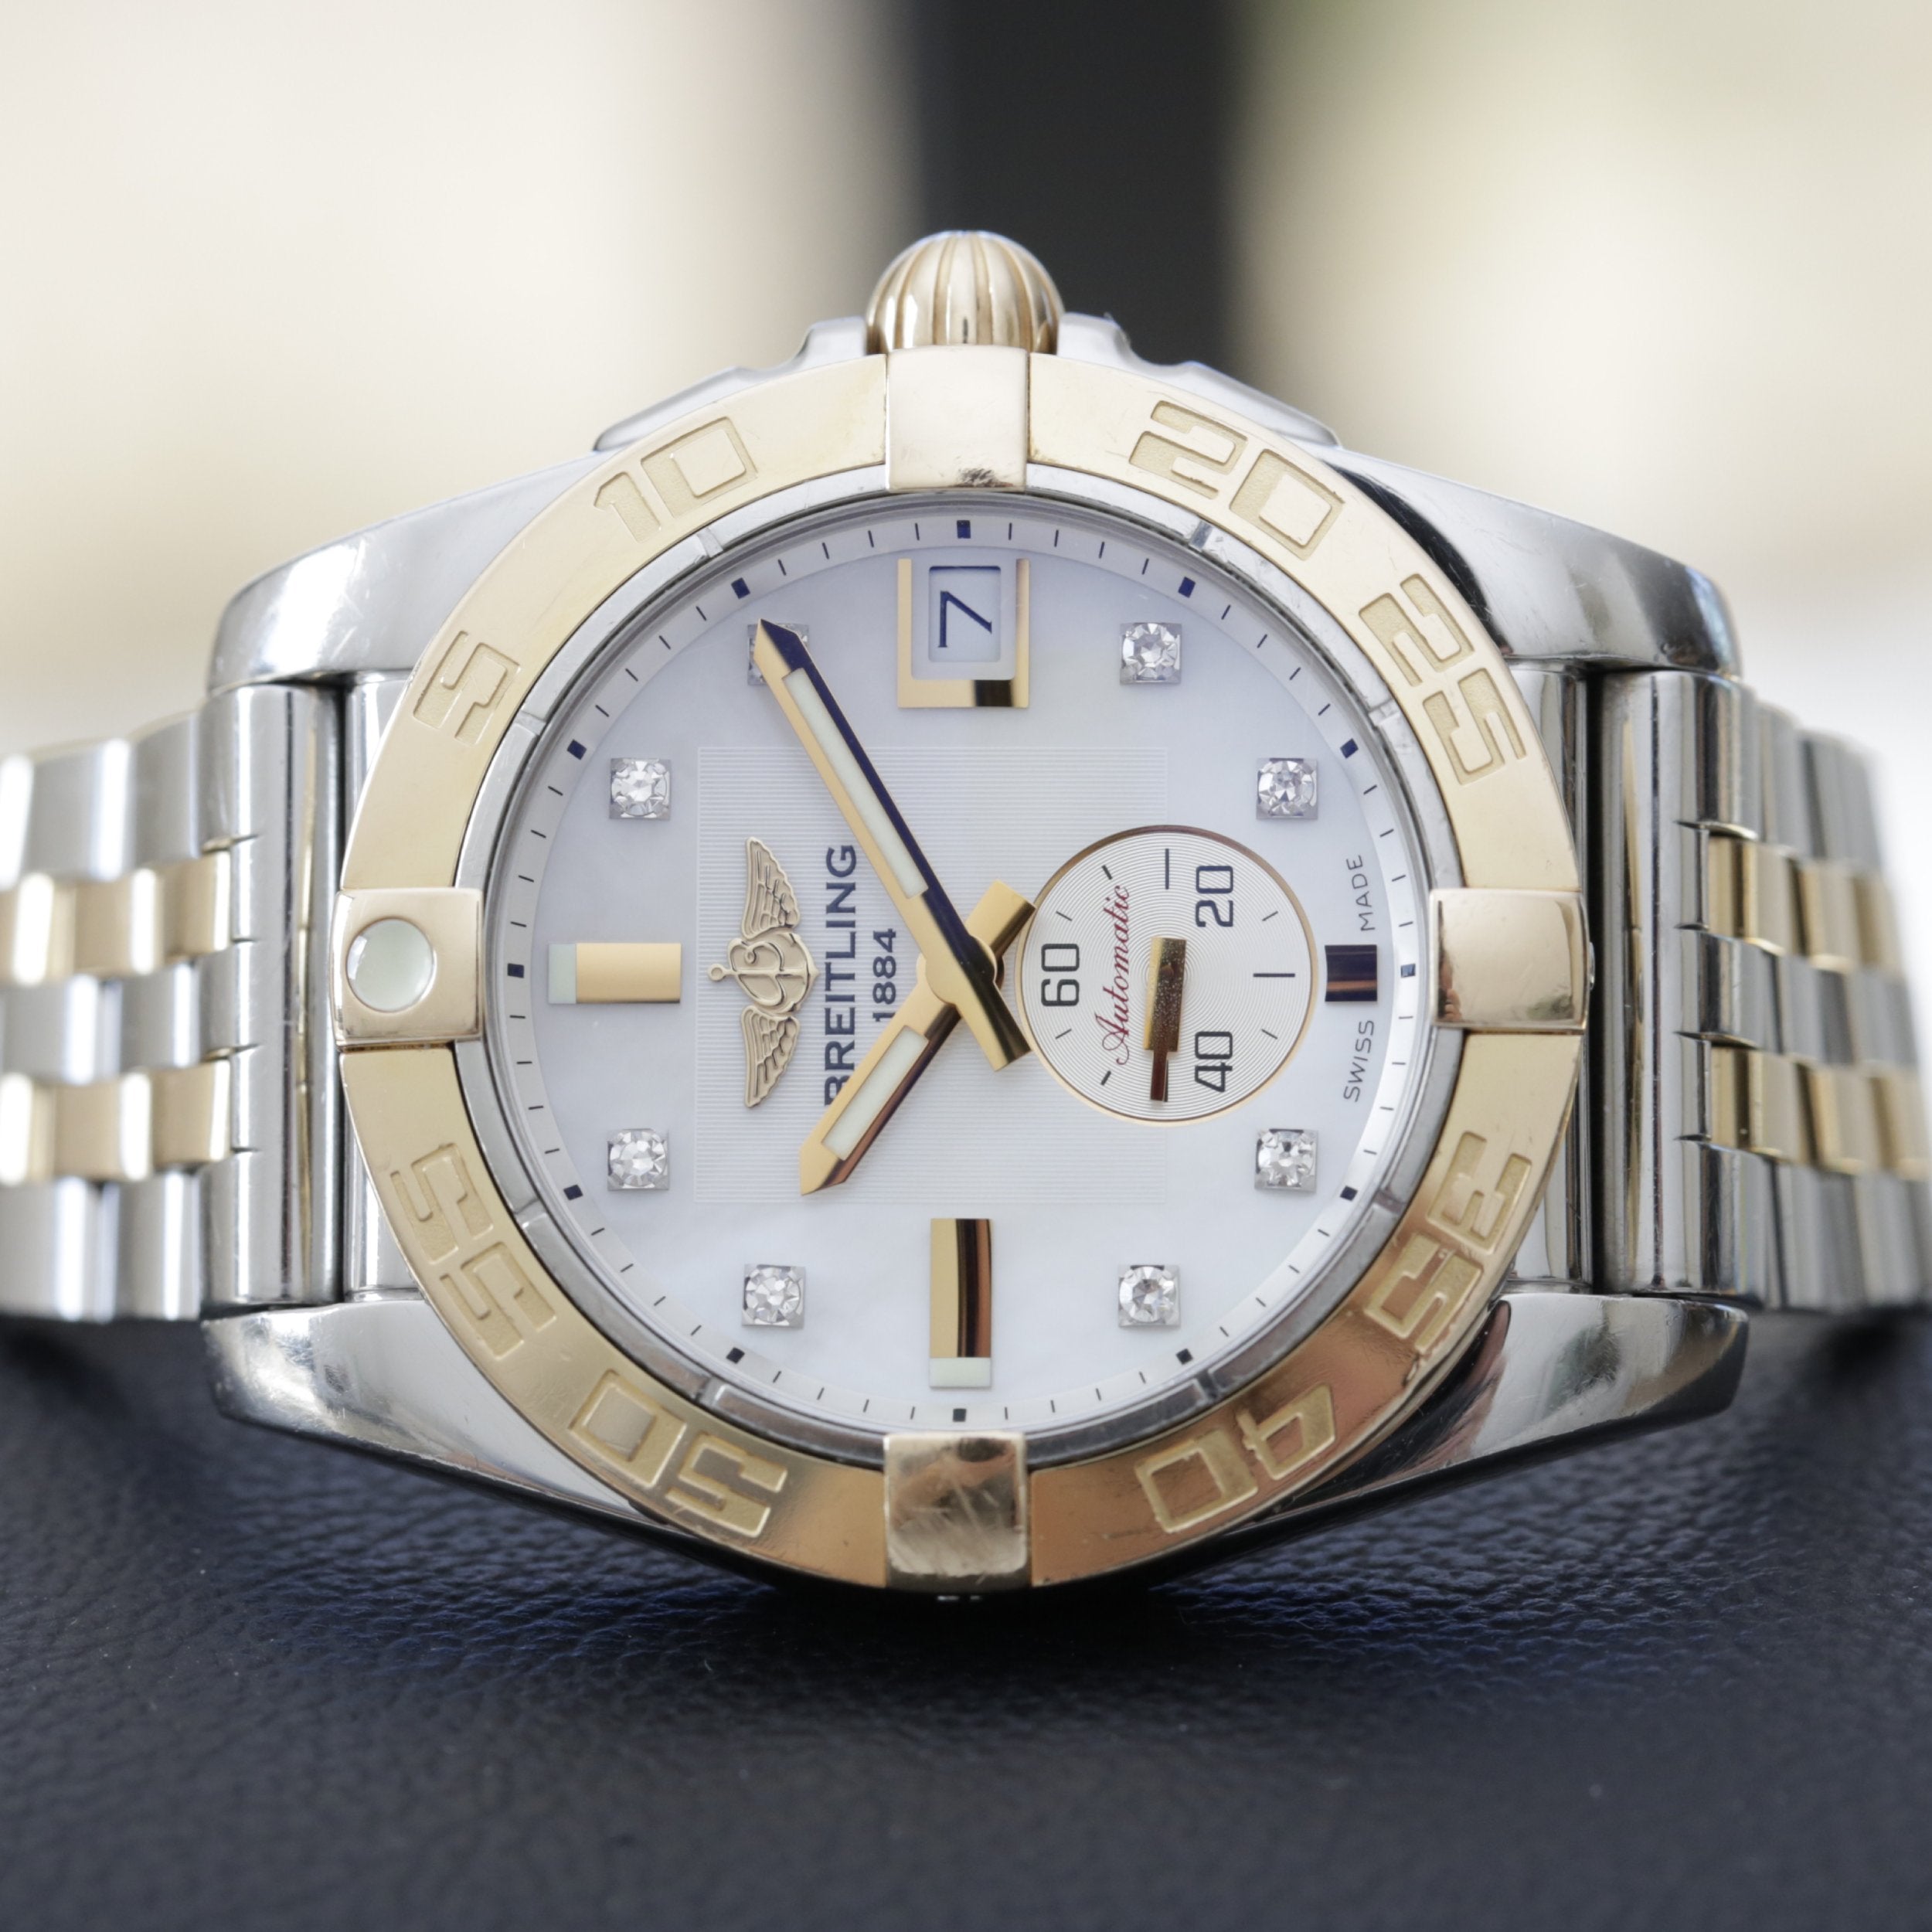 777CHRONOS | Buy, sell and trade pre-owned luxury watches – 777CRHONOS